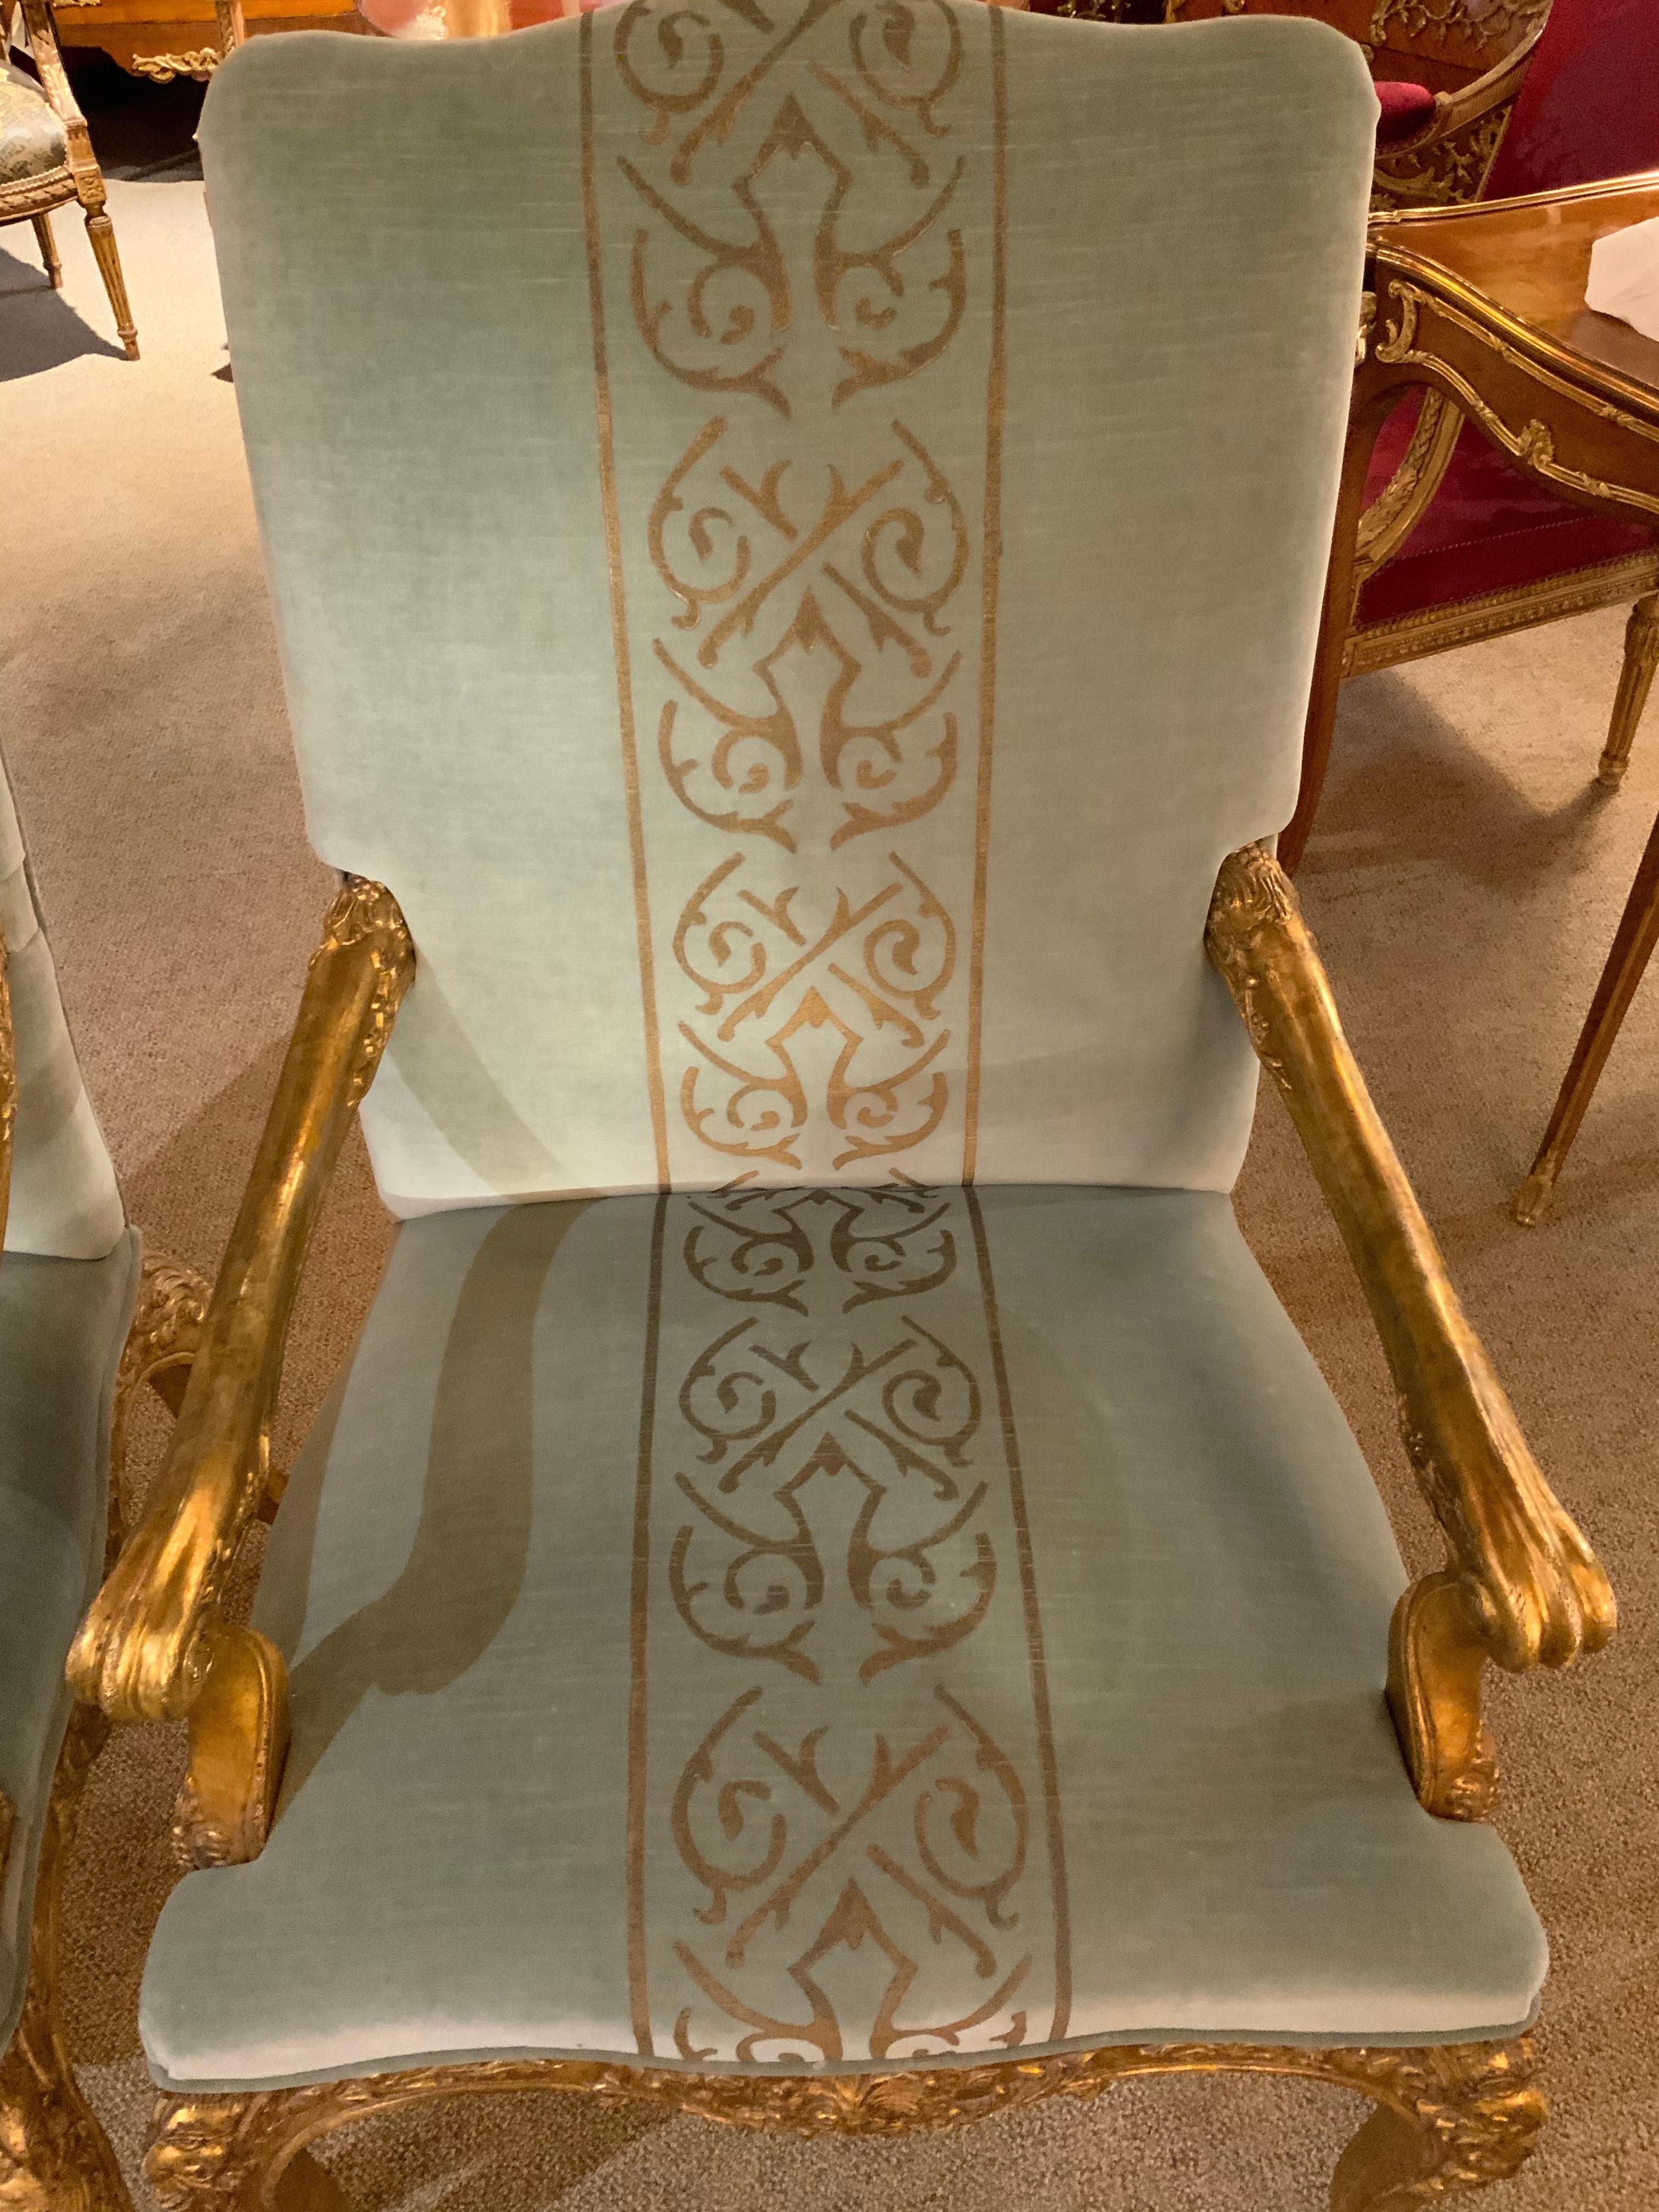 20th Century Pair of Giltwood Arm Chairs, Louis XV-Style Upholstered in Pale Aqua Blue /Gold